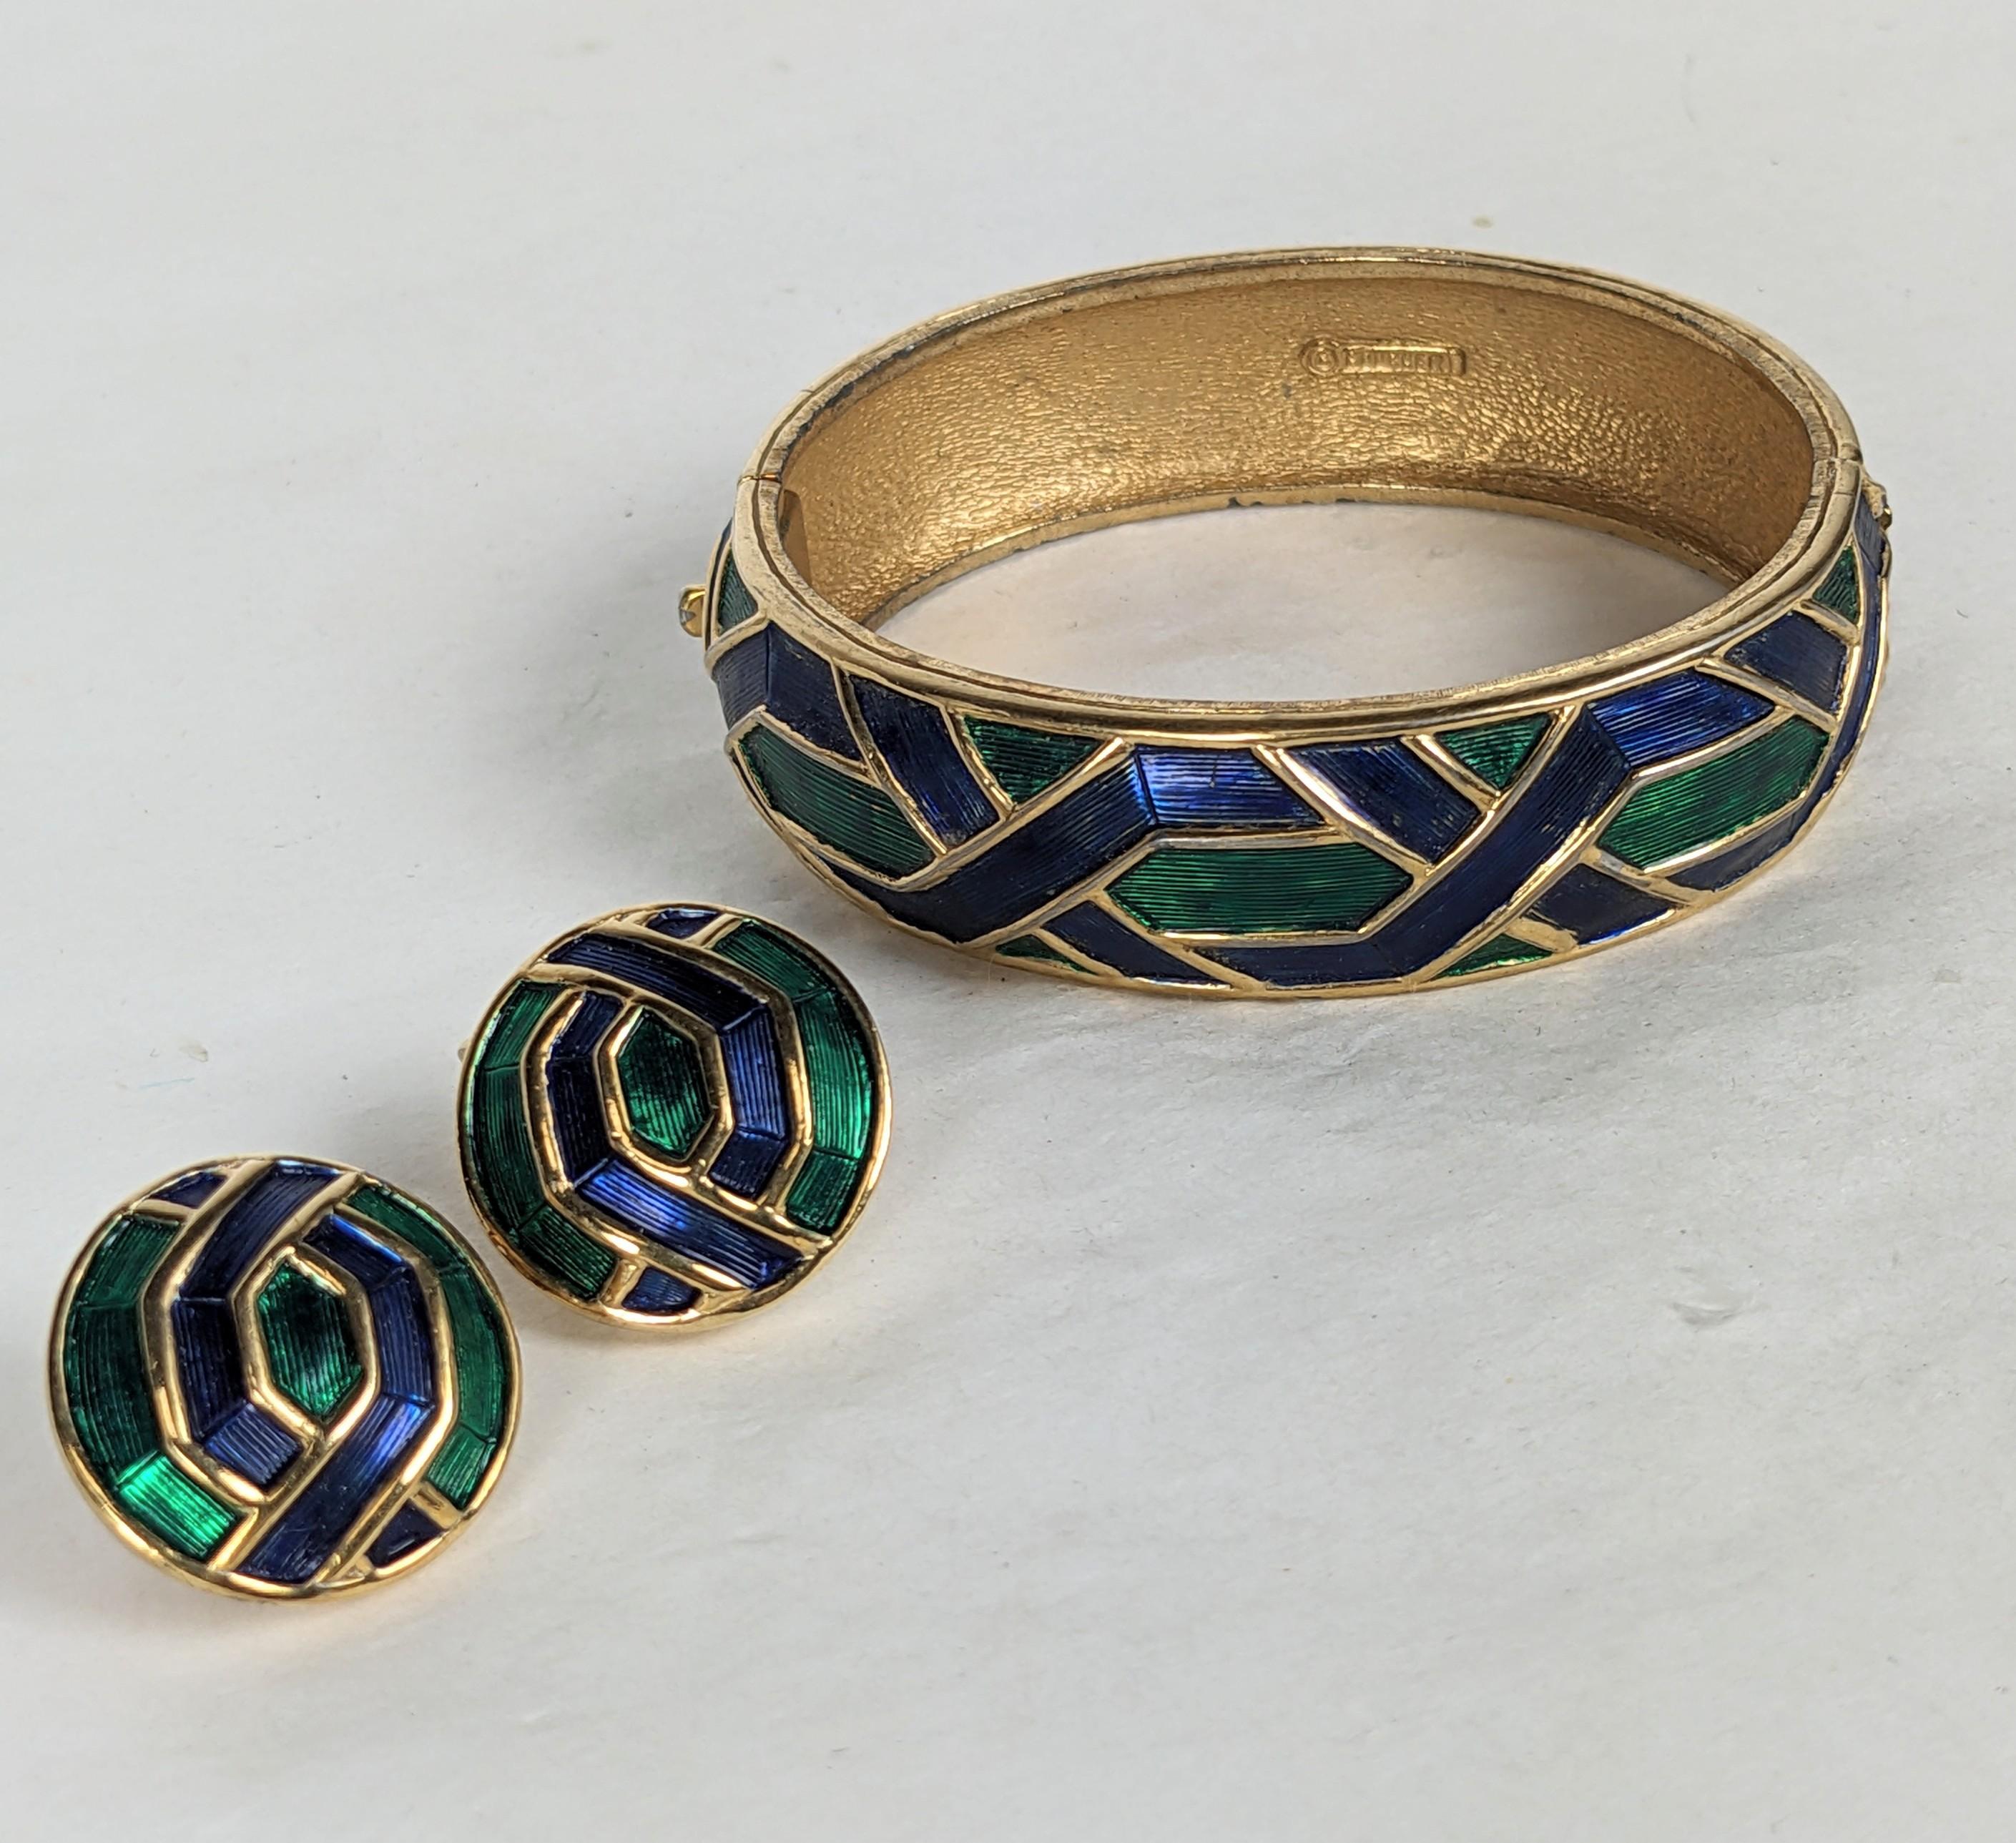 Marcel Boucher Enamel Bangle Suite from the 1960's. Bangle and matching ear clip earrings. Gilt metal with emerald and deep sapphire glowing enamel in geometric motifs. 1960's USA. 
Bracelet .65